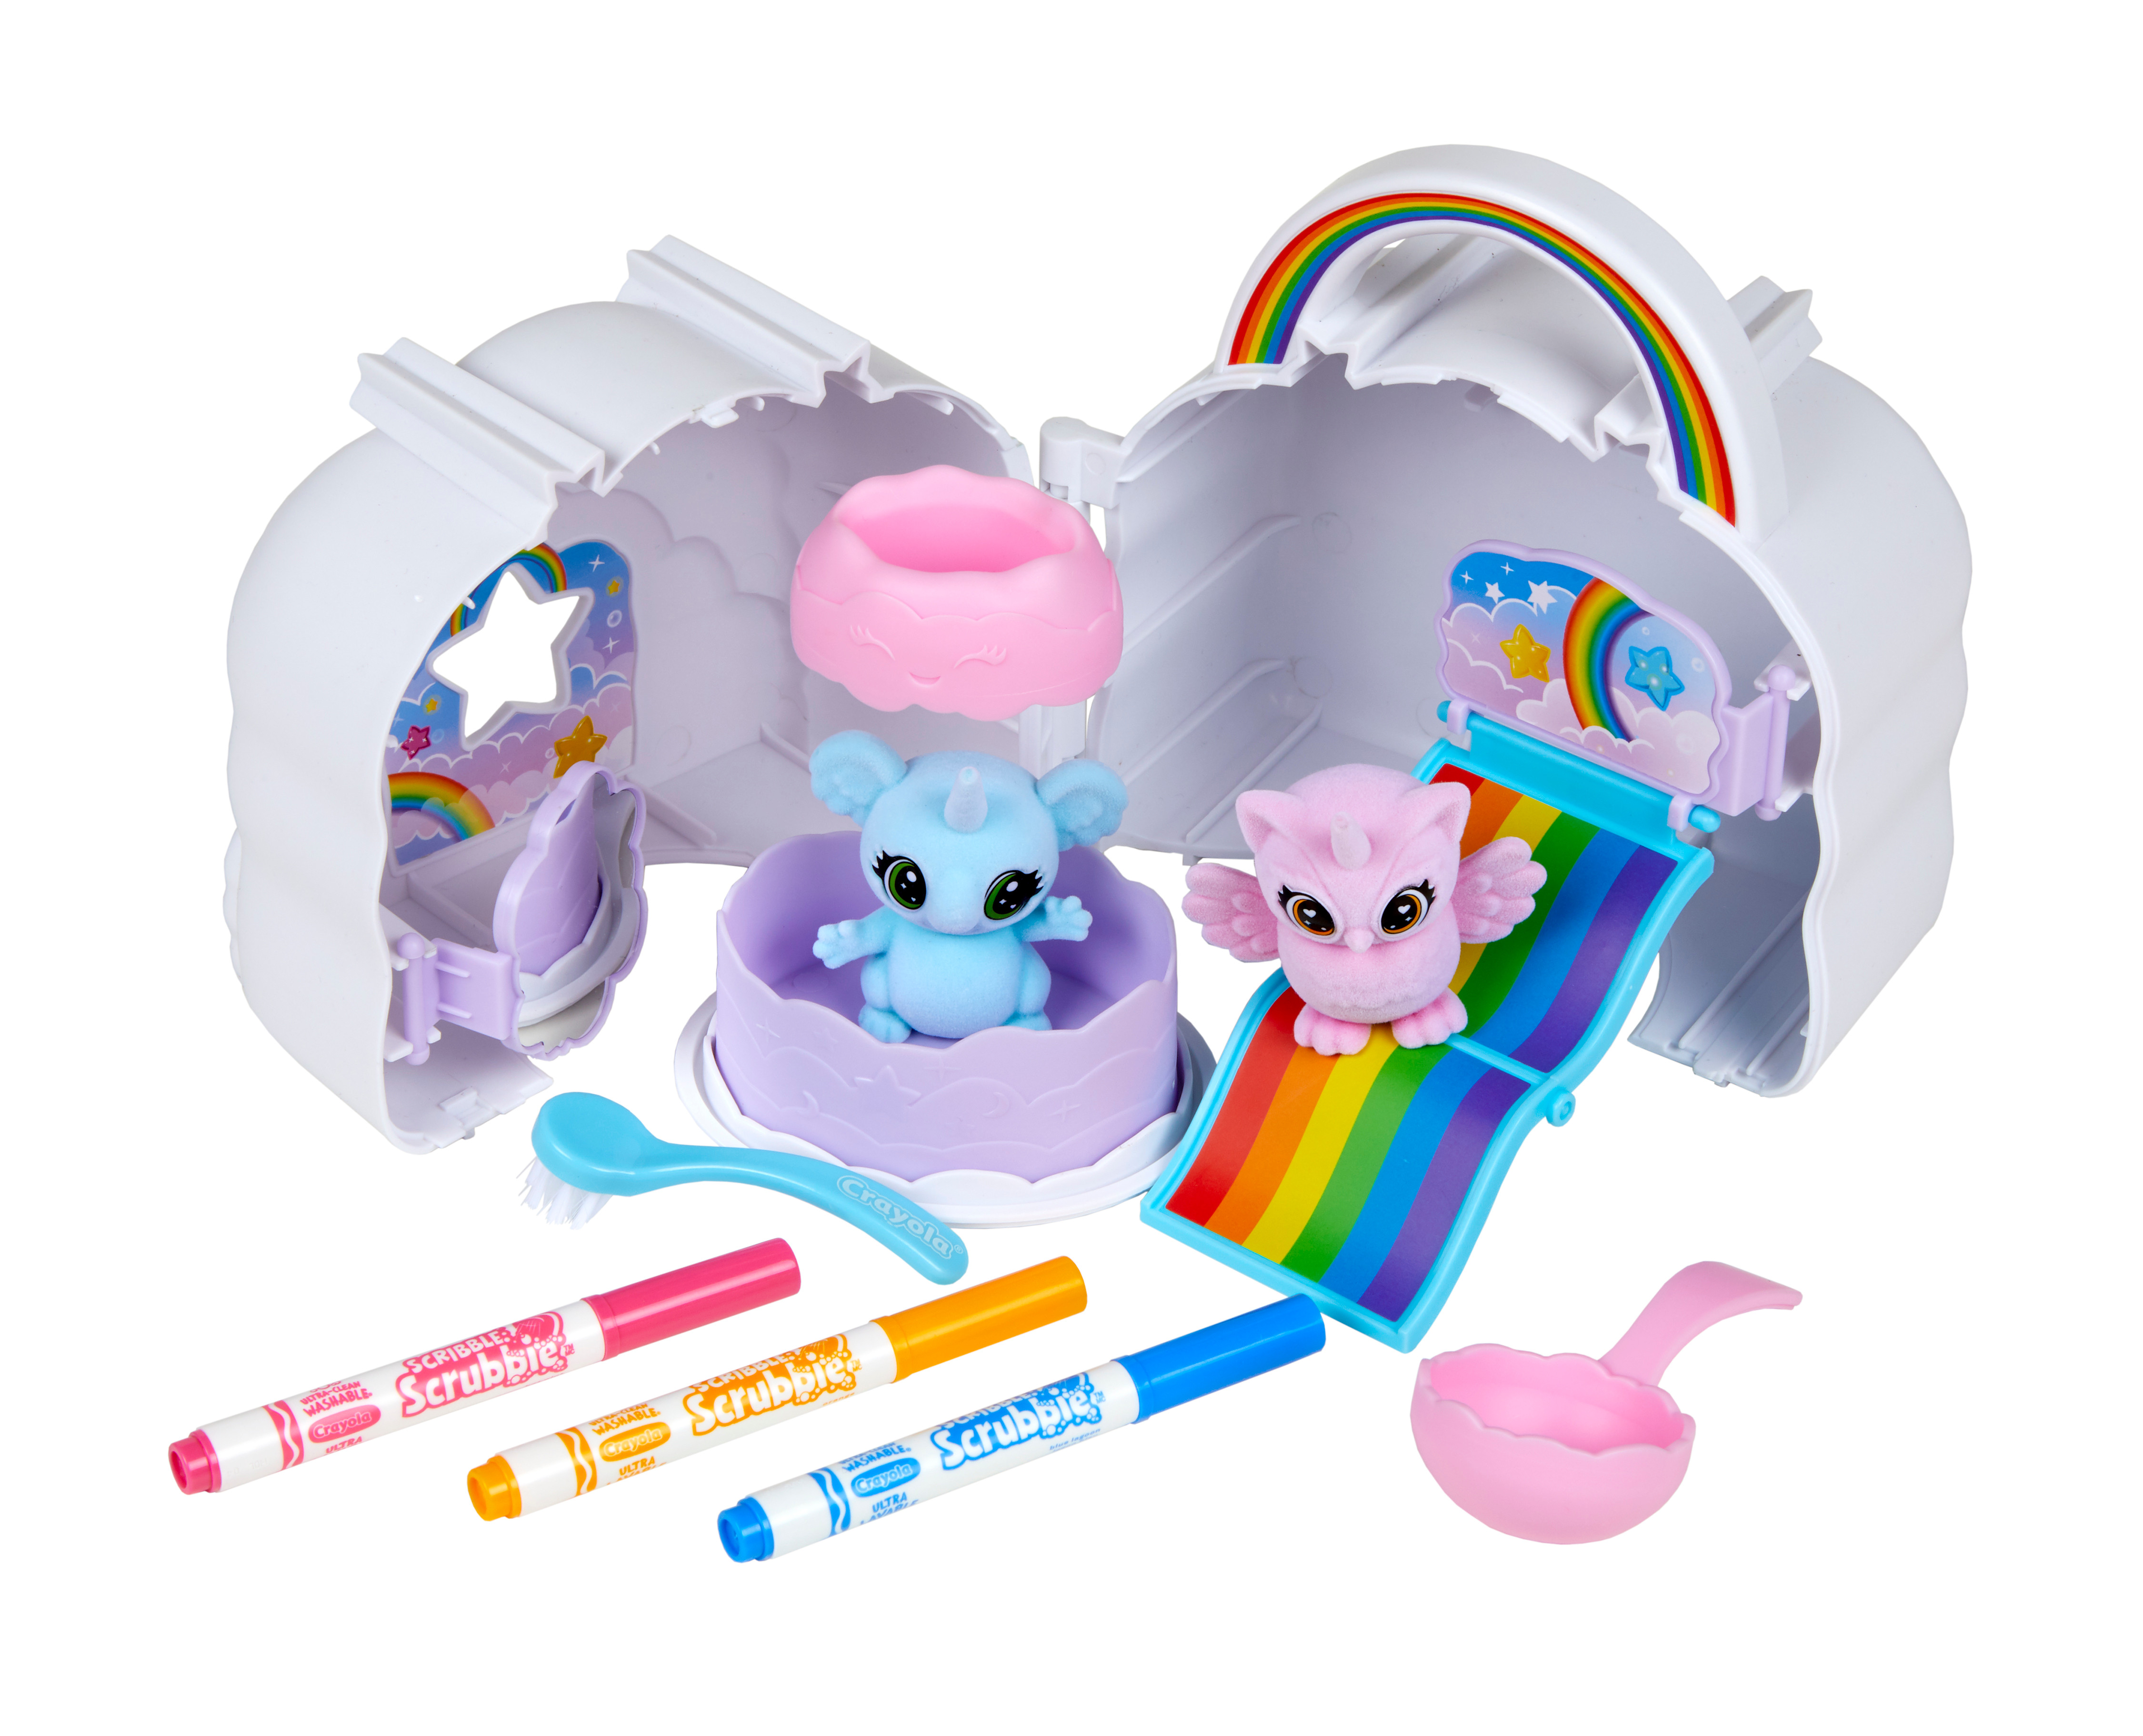 Crayola Scribble Scrubbie Cloud Clubhouse, Coloring Toys, Gifts, Beginner Unisex Child, 8 Pcs - image 6 of 10